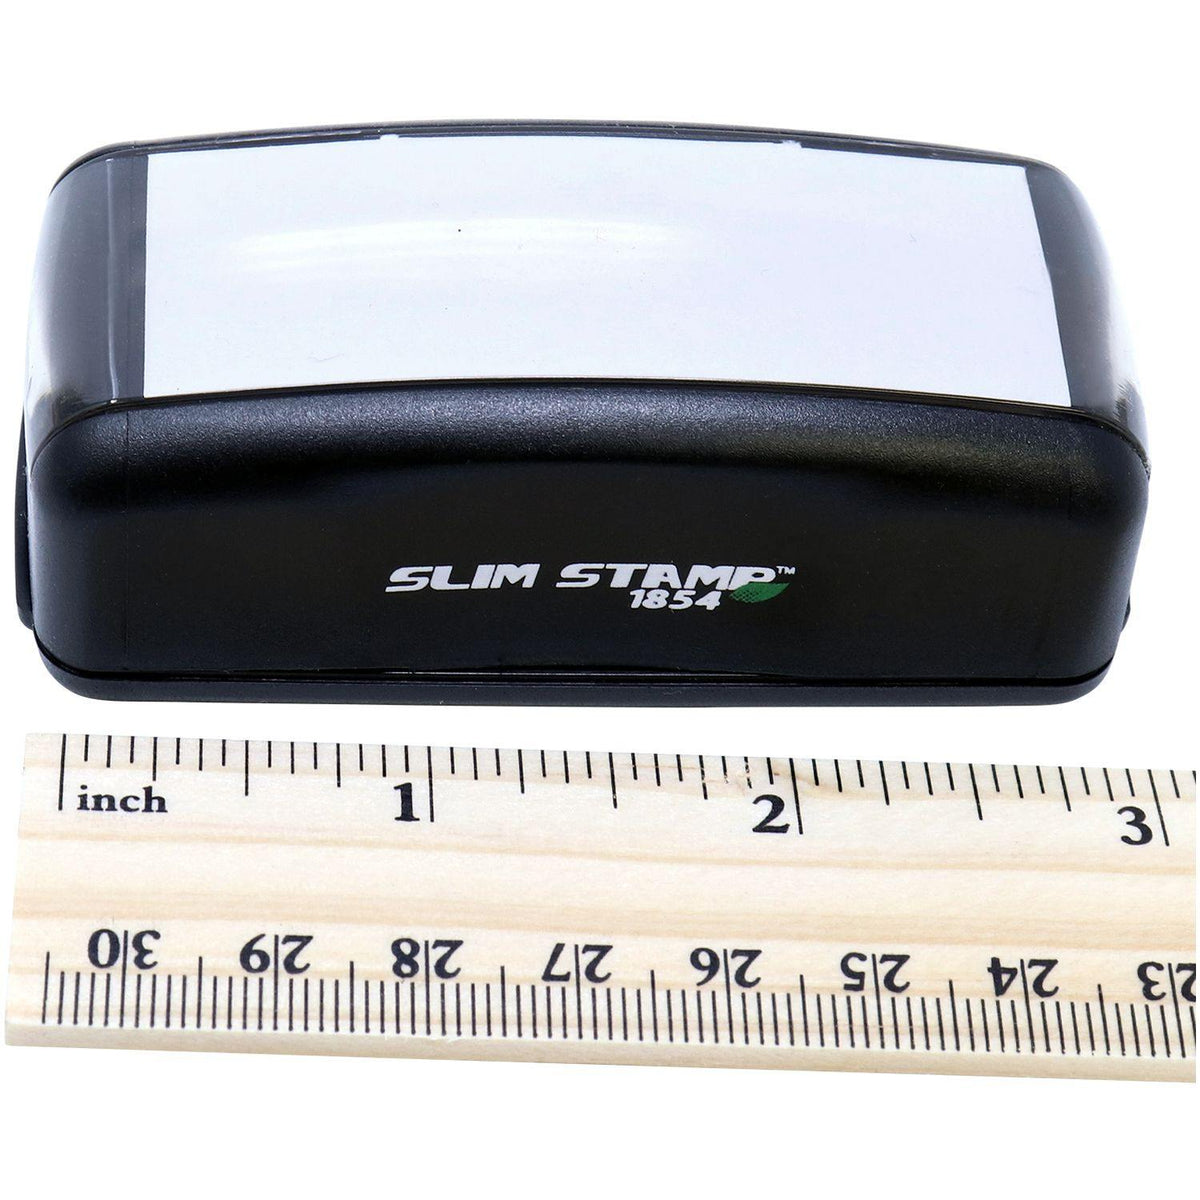 Measurement Large Pre-Inked Lower Case First Class Stamp with Ruler